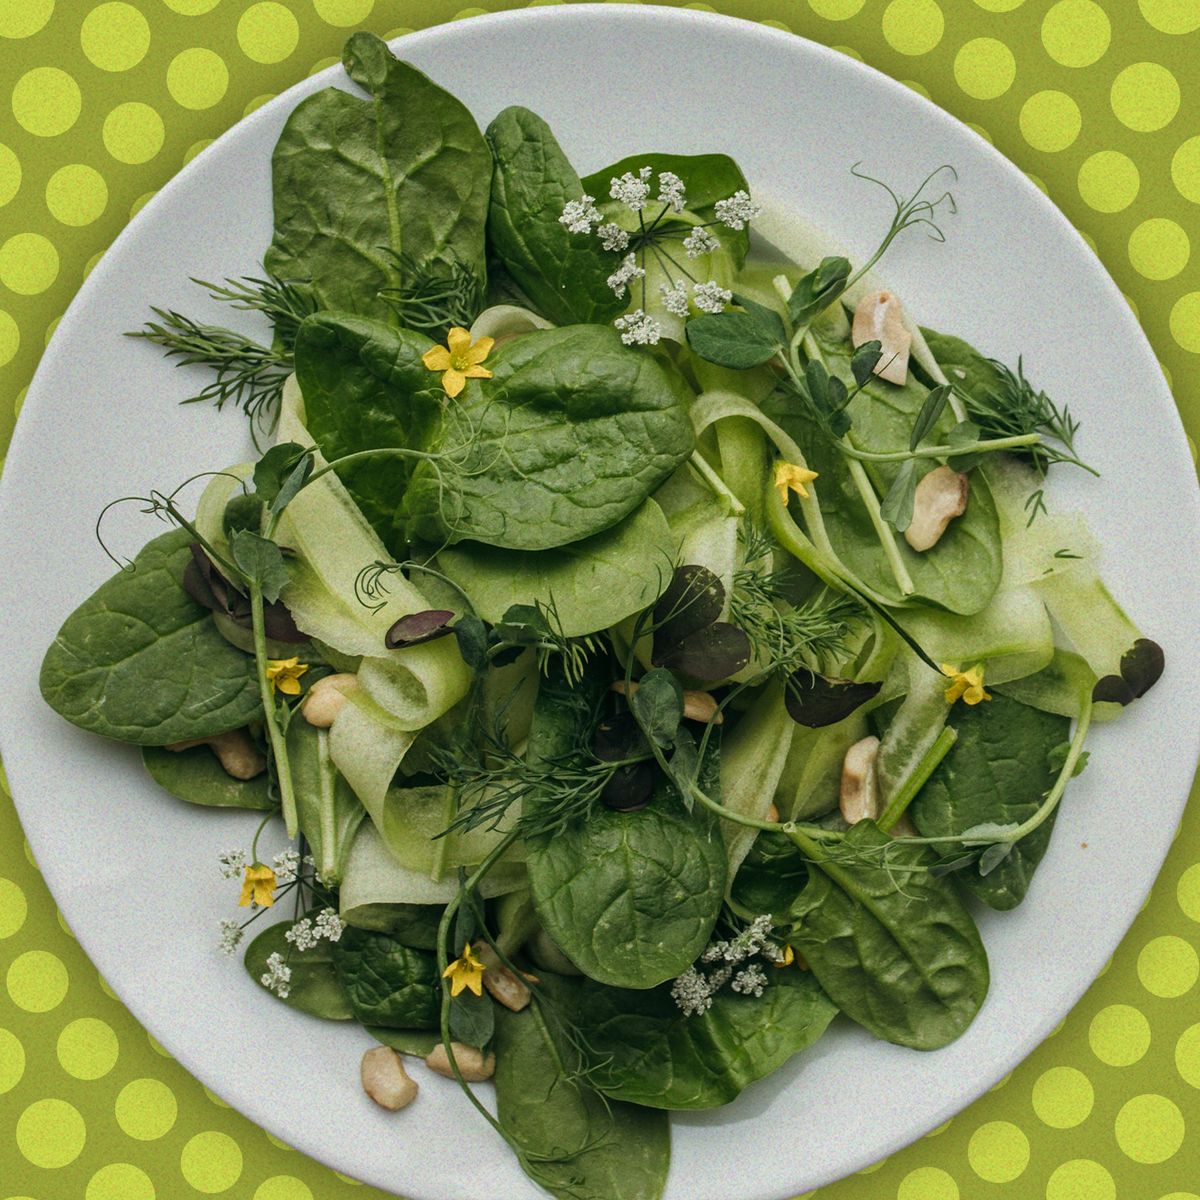 How to Use Up Salad Greens